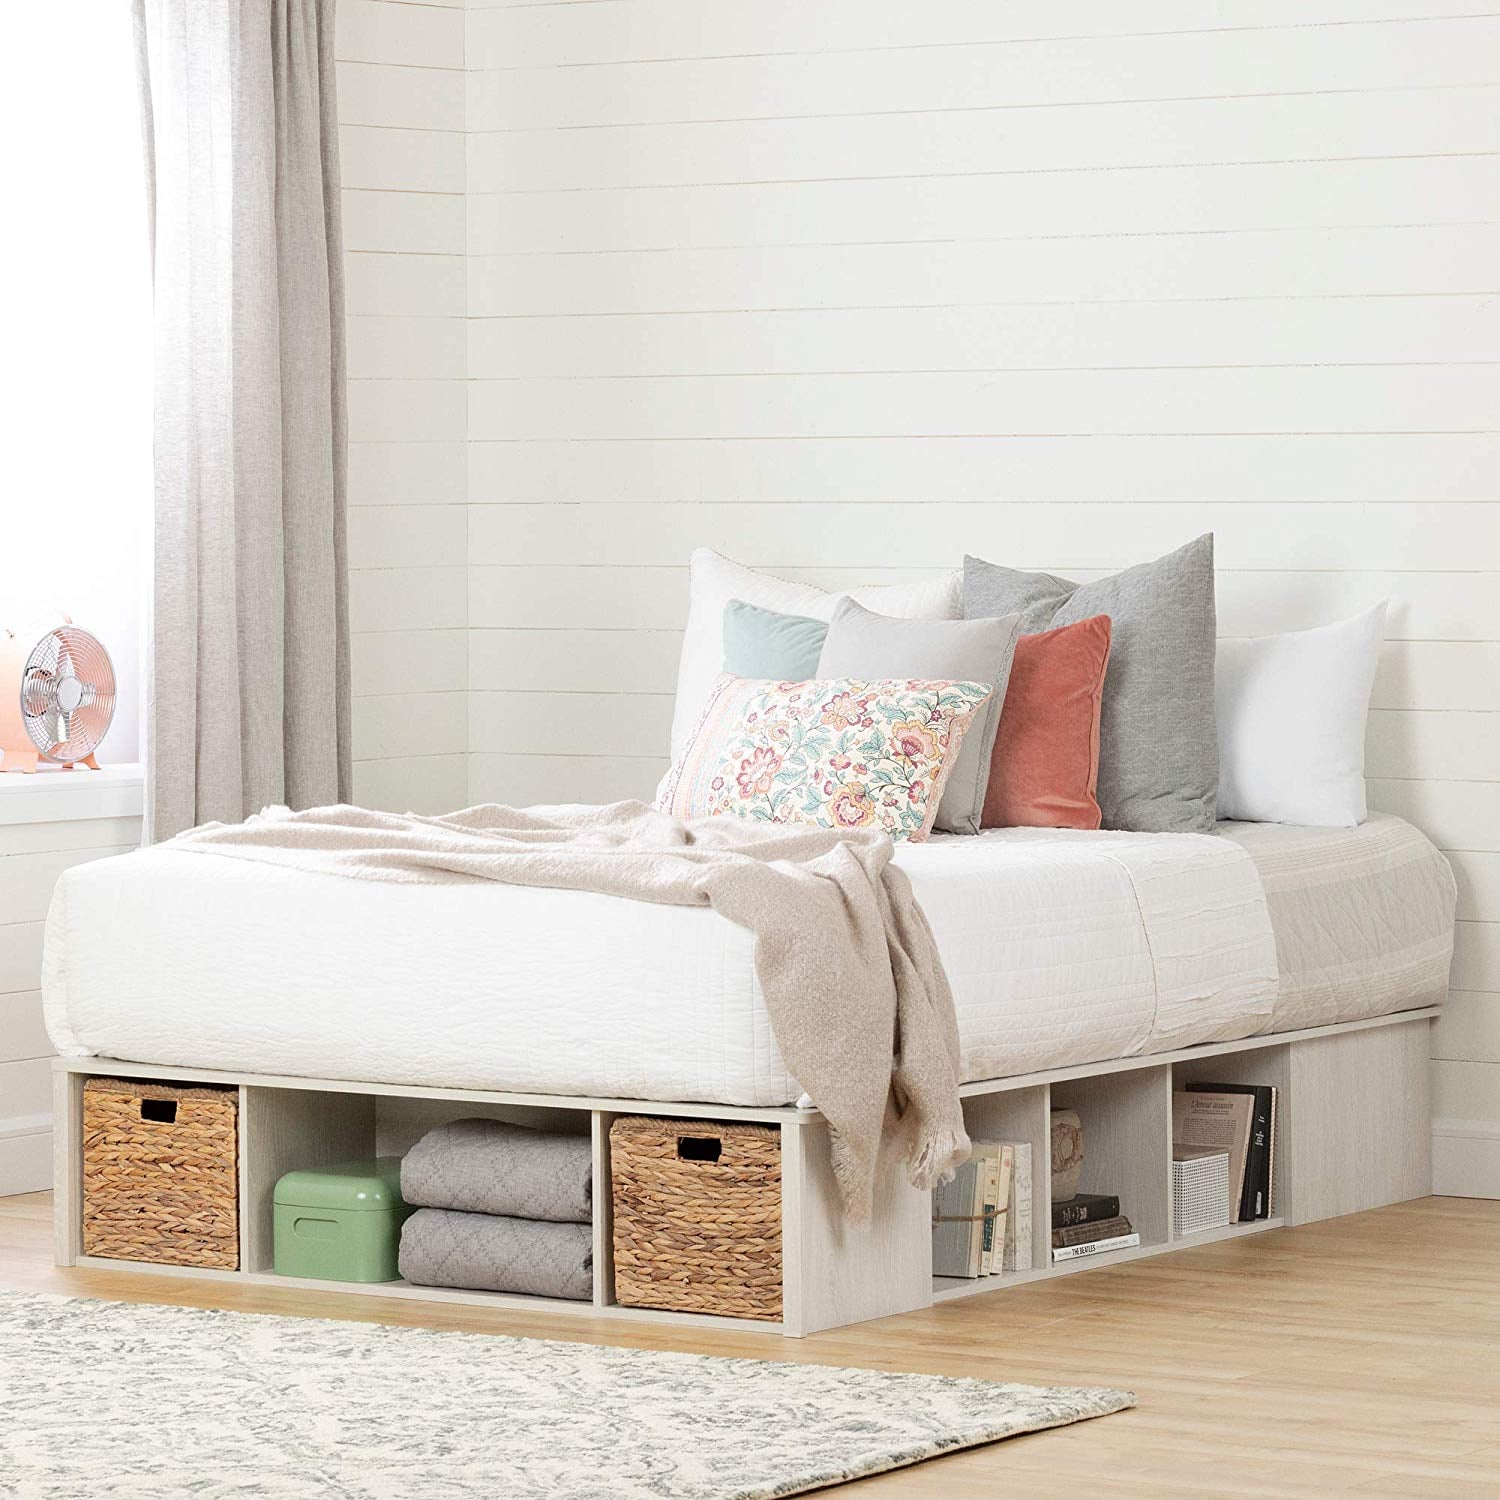 Best Space-Saving Bedroom Furniture and Decor on